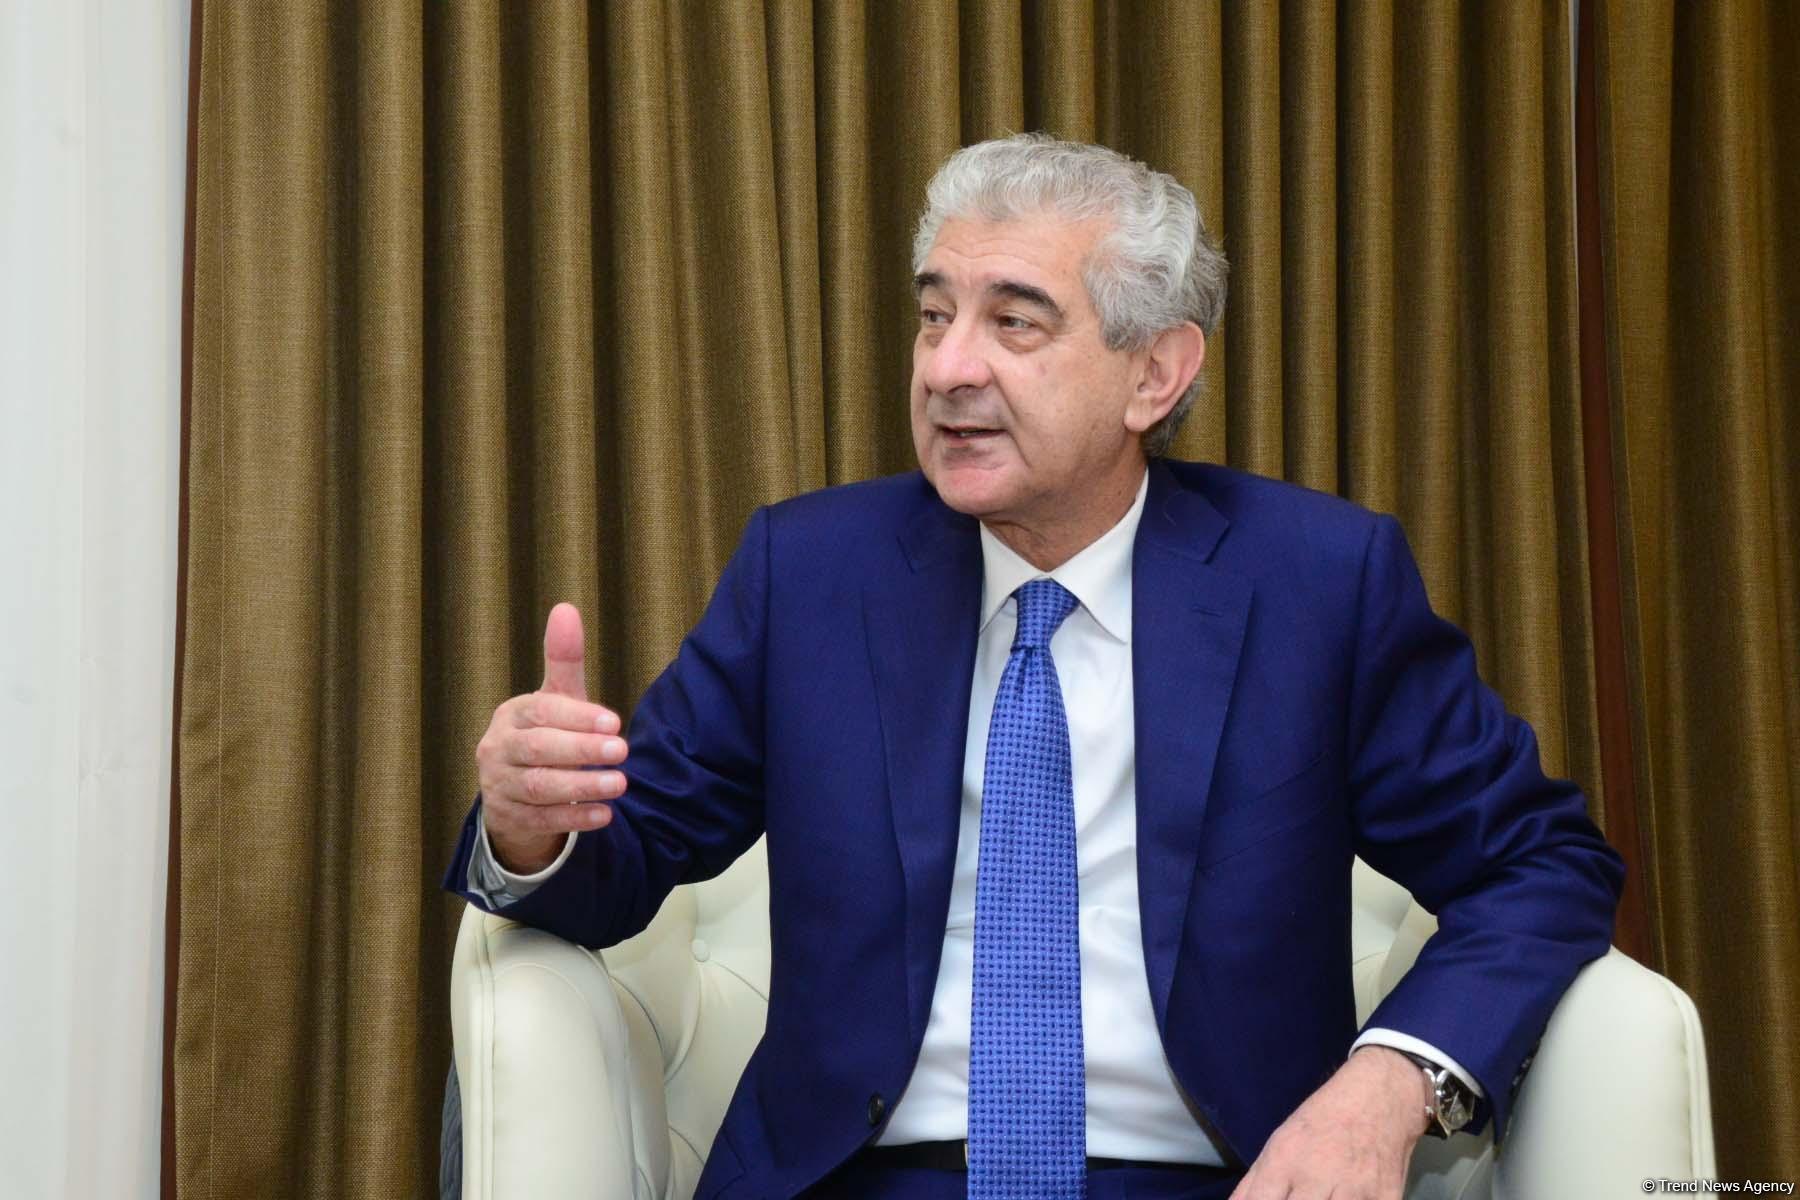 Ilham Aliyev's candidacy for presidential election must be decided unanimously - deputy PM